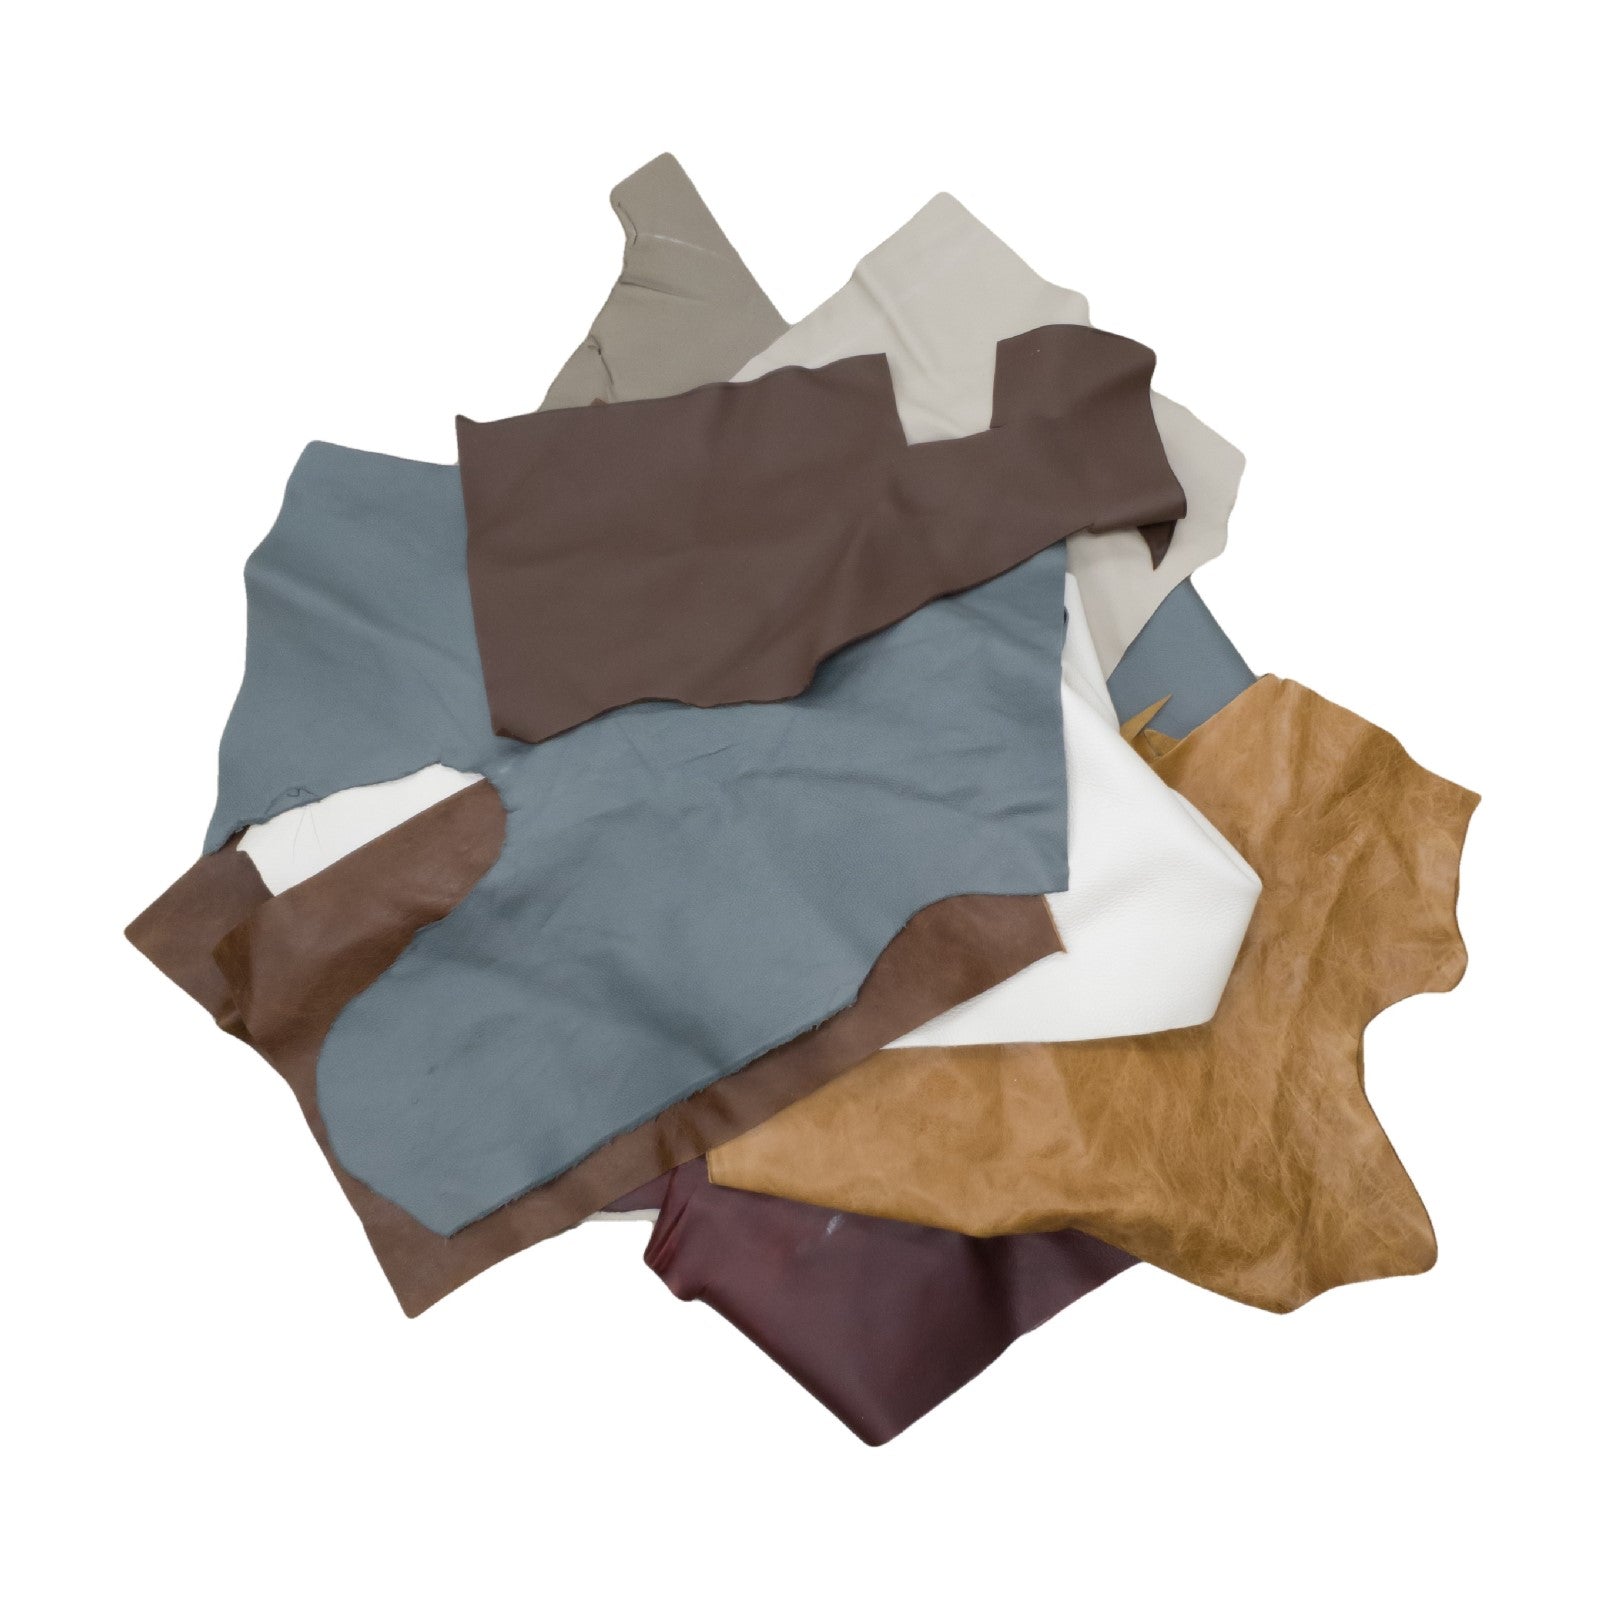 Upholstery Scrap Remnant Bags - 3-4 oz Color Mix, Large Pieces / 5 lb | The Leather Guy